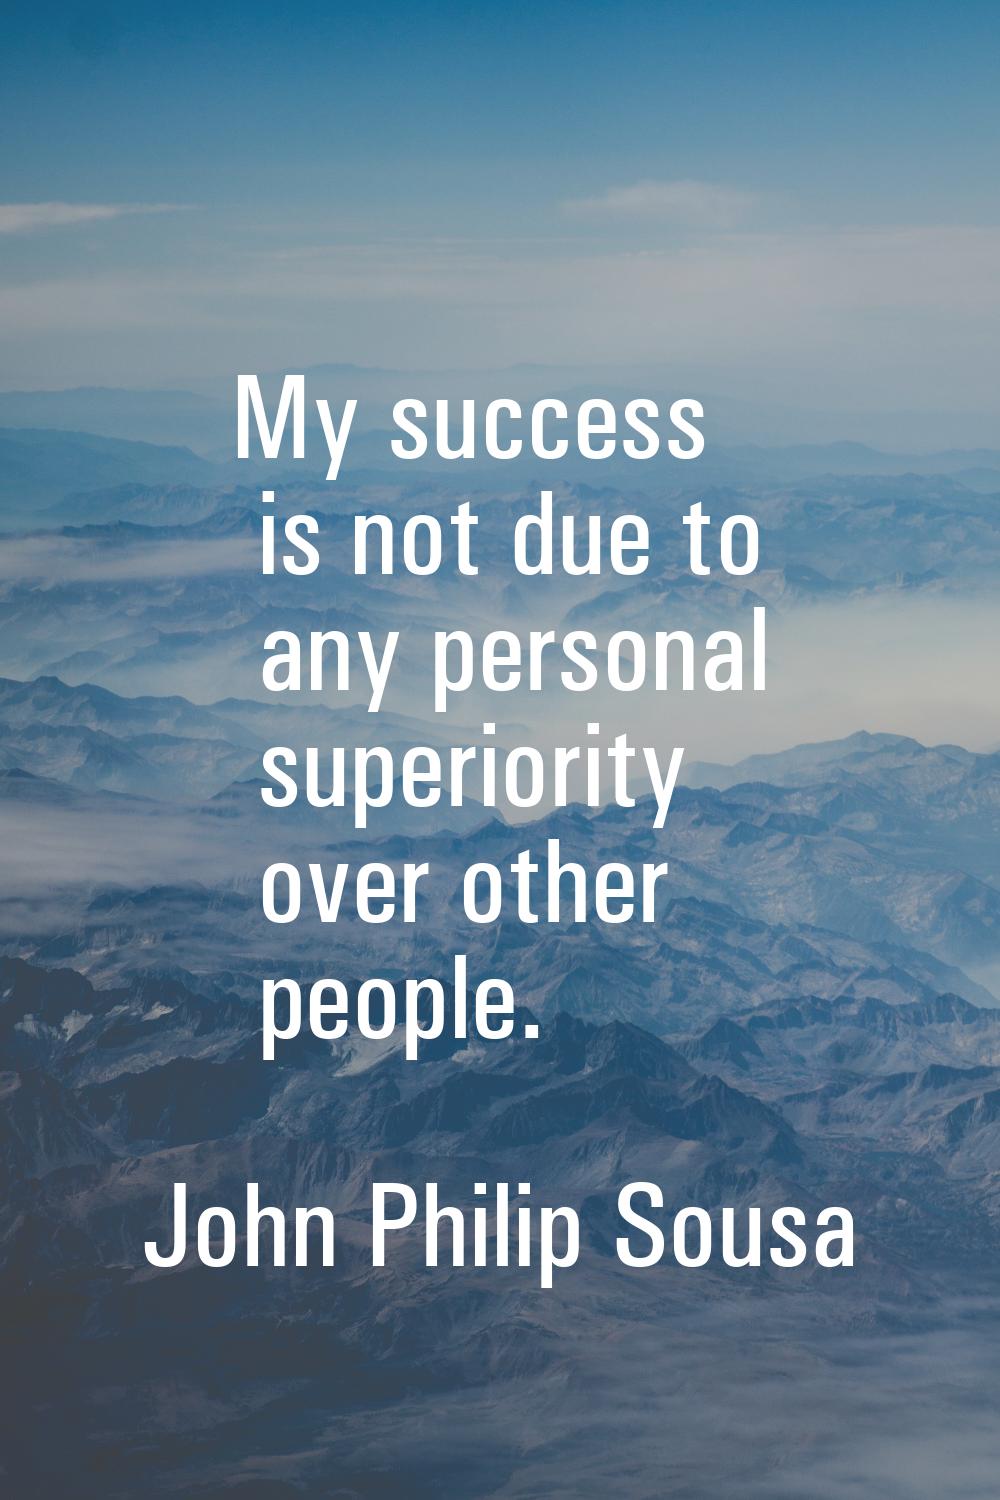 My success is not due to any personal superiority over other people.